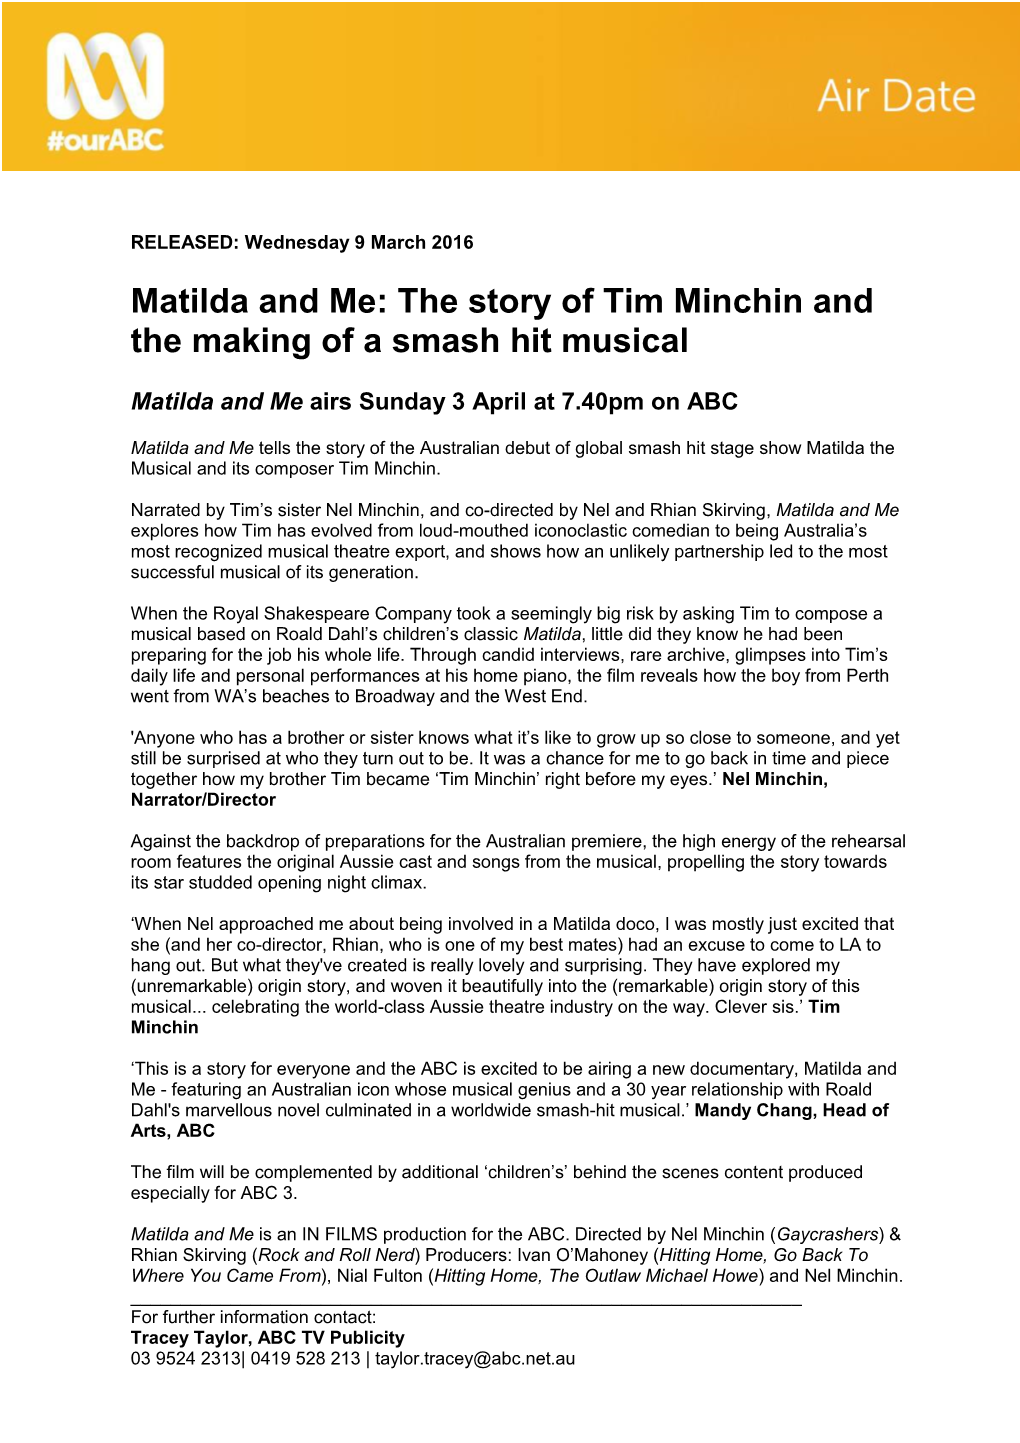 Matilda and Me: the Story of Tim Minchin and the Making of a Smash Hit Musical